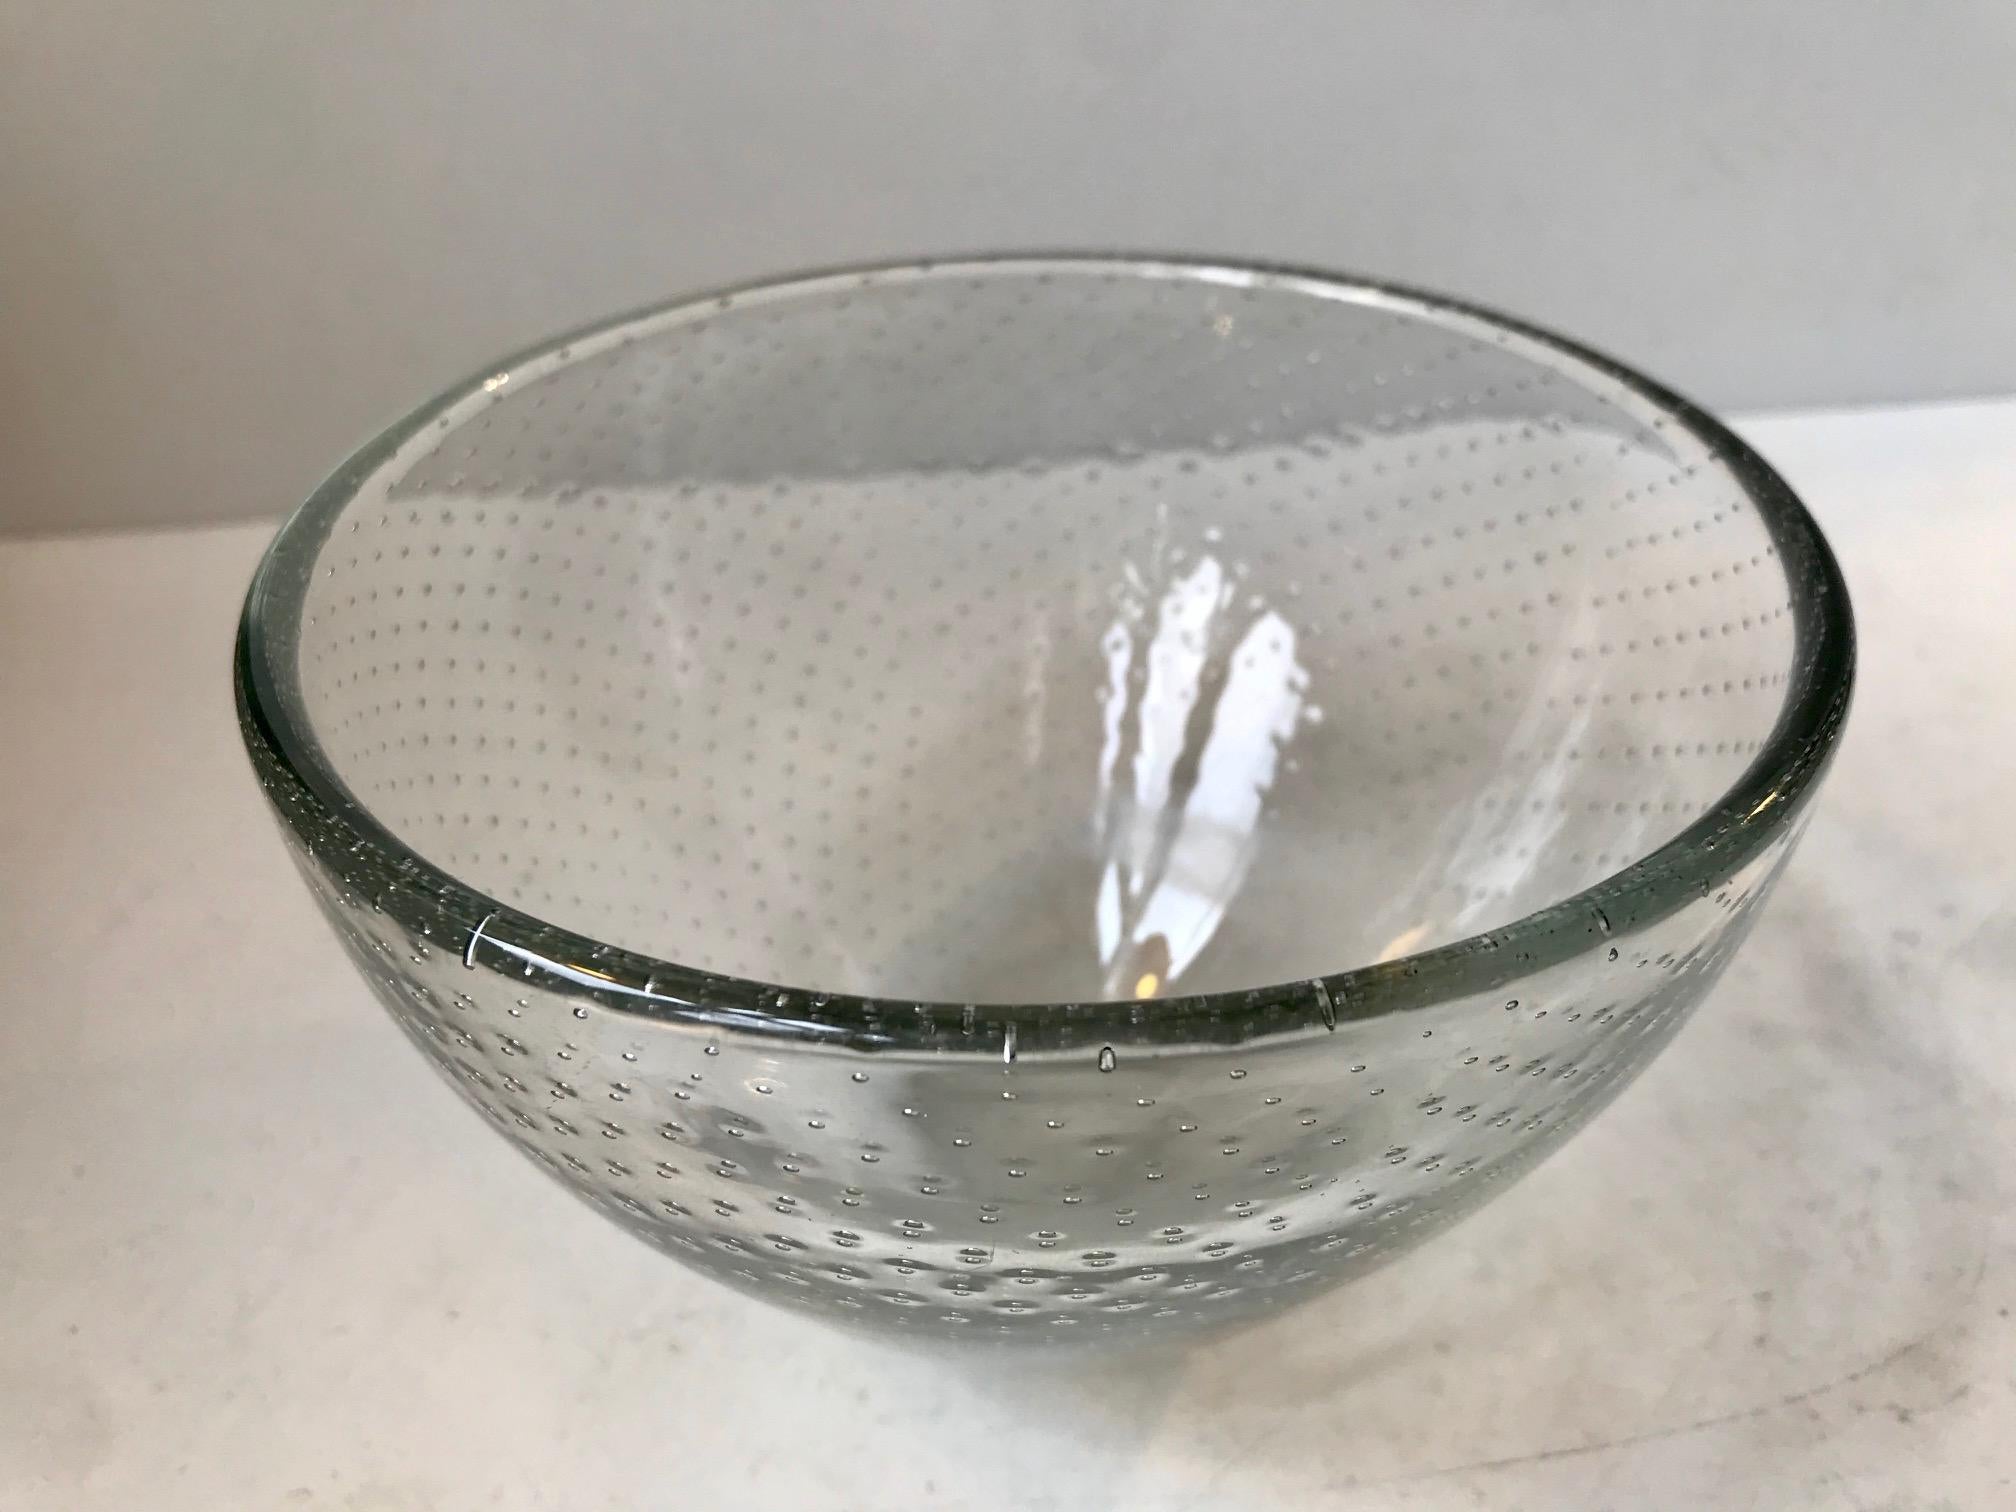 Unique blown glass bowl, internally decorated with control bubbles, Its is an early piece designed by Gunnel Nyman during the 1940s where it was made at the glass studio Nuutajarvi Nottsjo in Finland. It is acid painted 